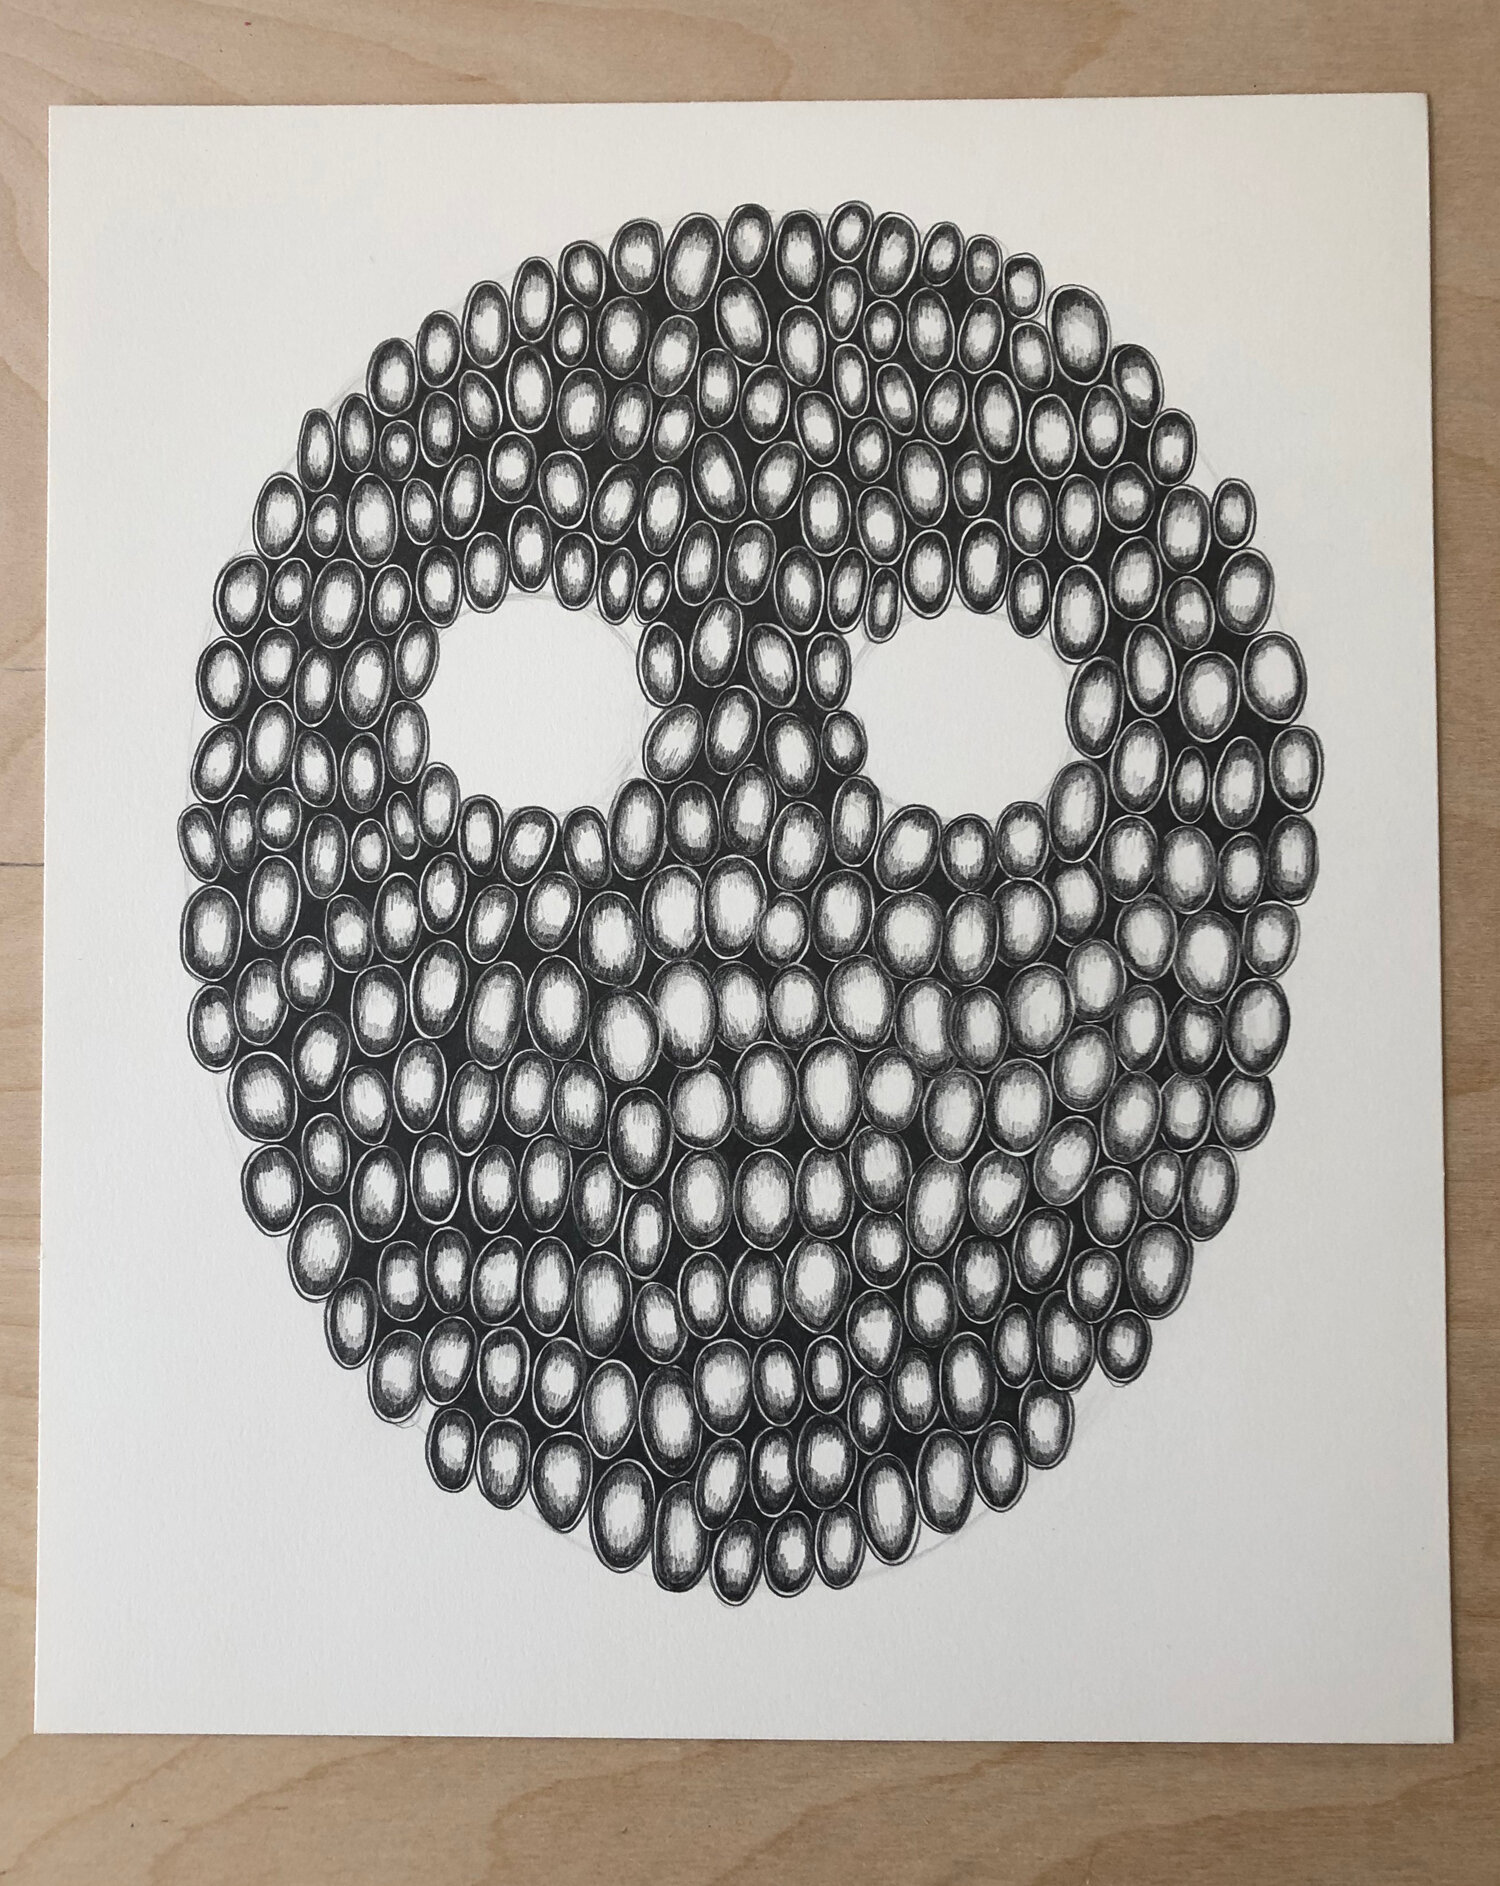 Mask, 2020, pencil on paper, 12 1/2 x 10 3/4"